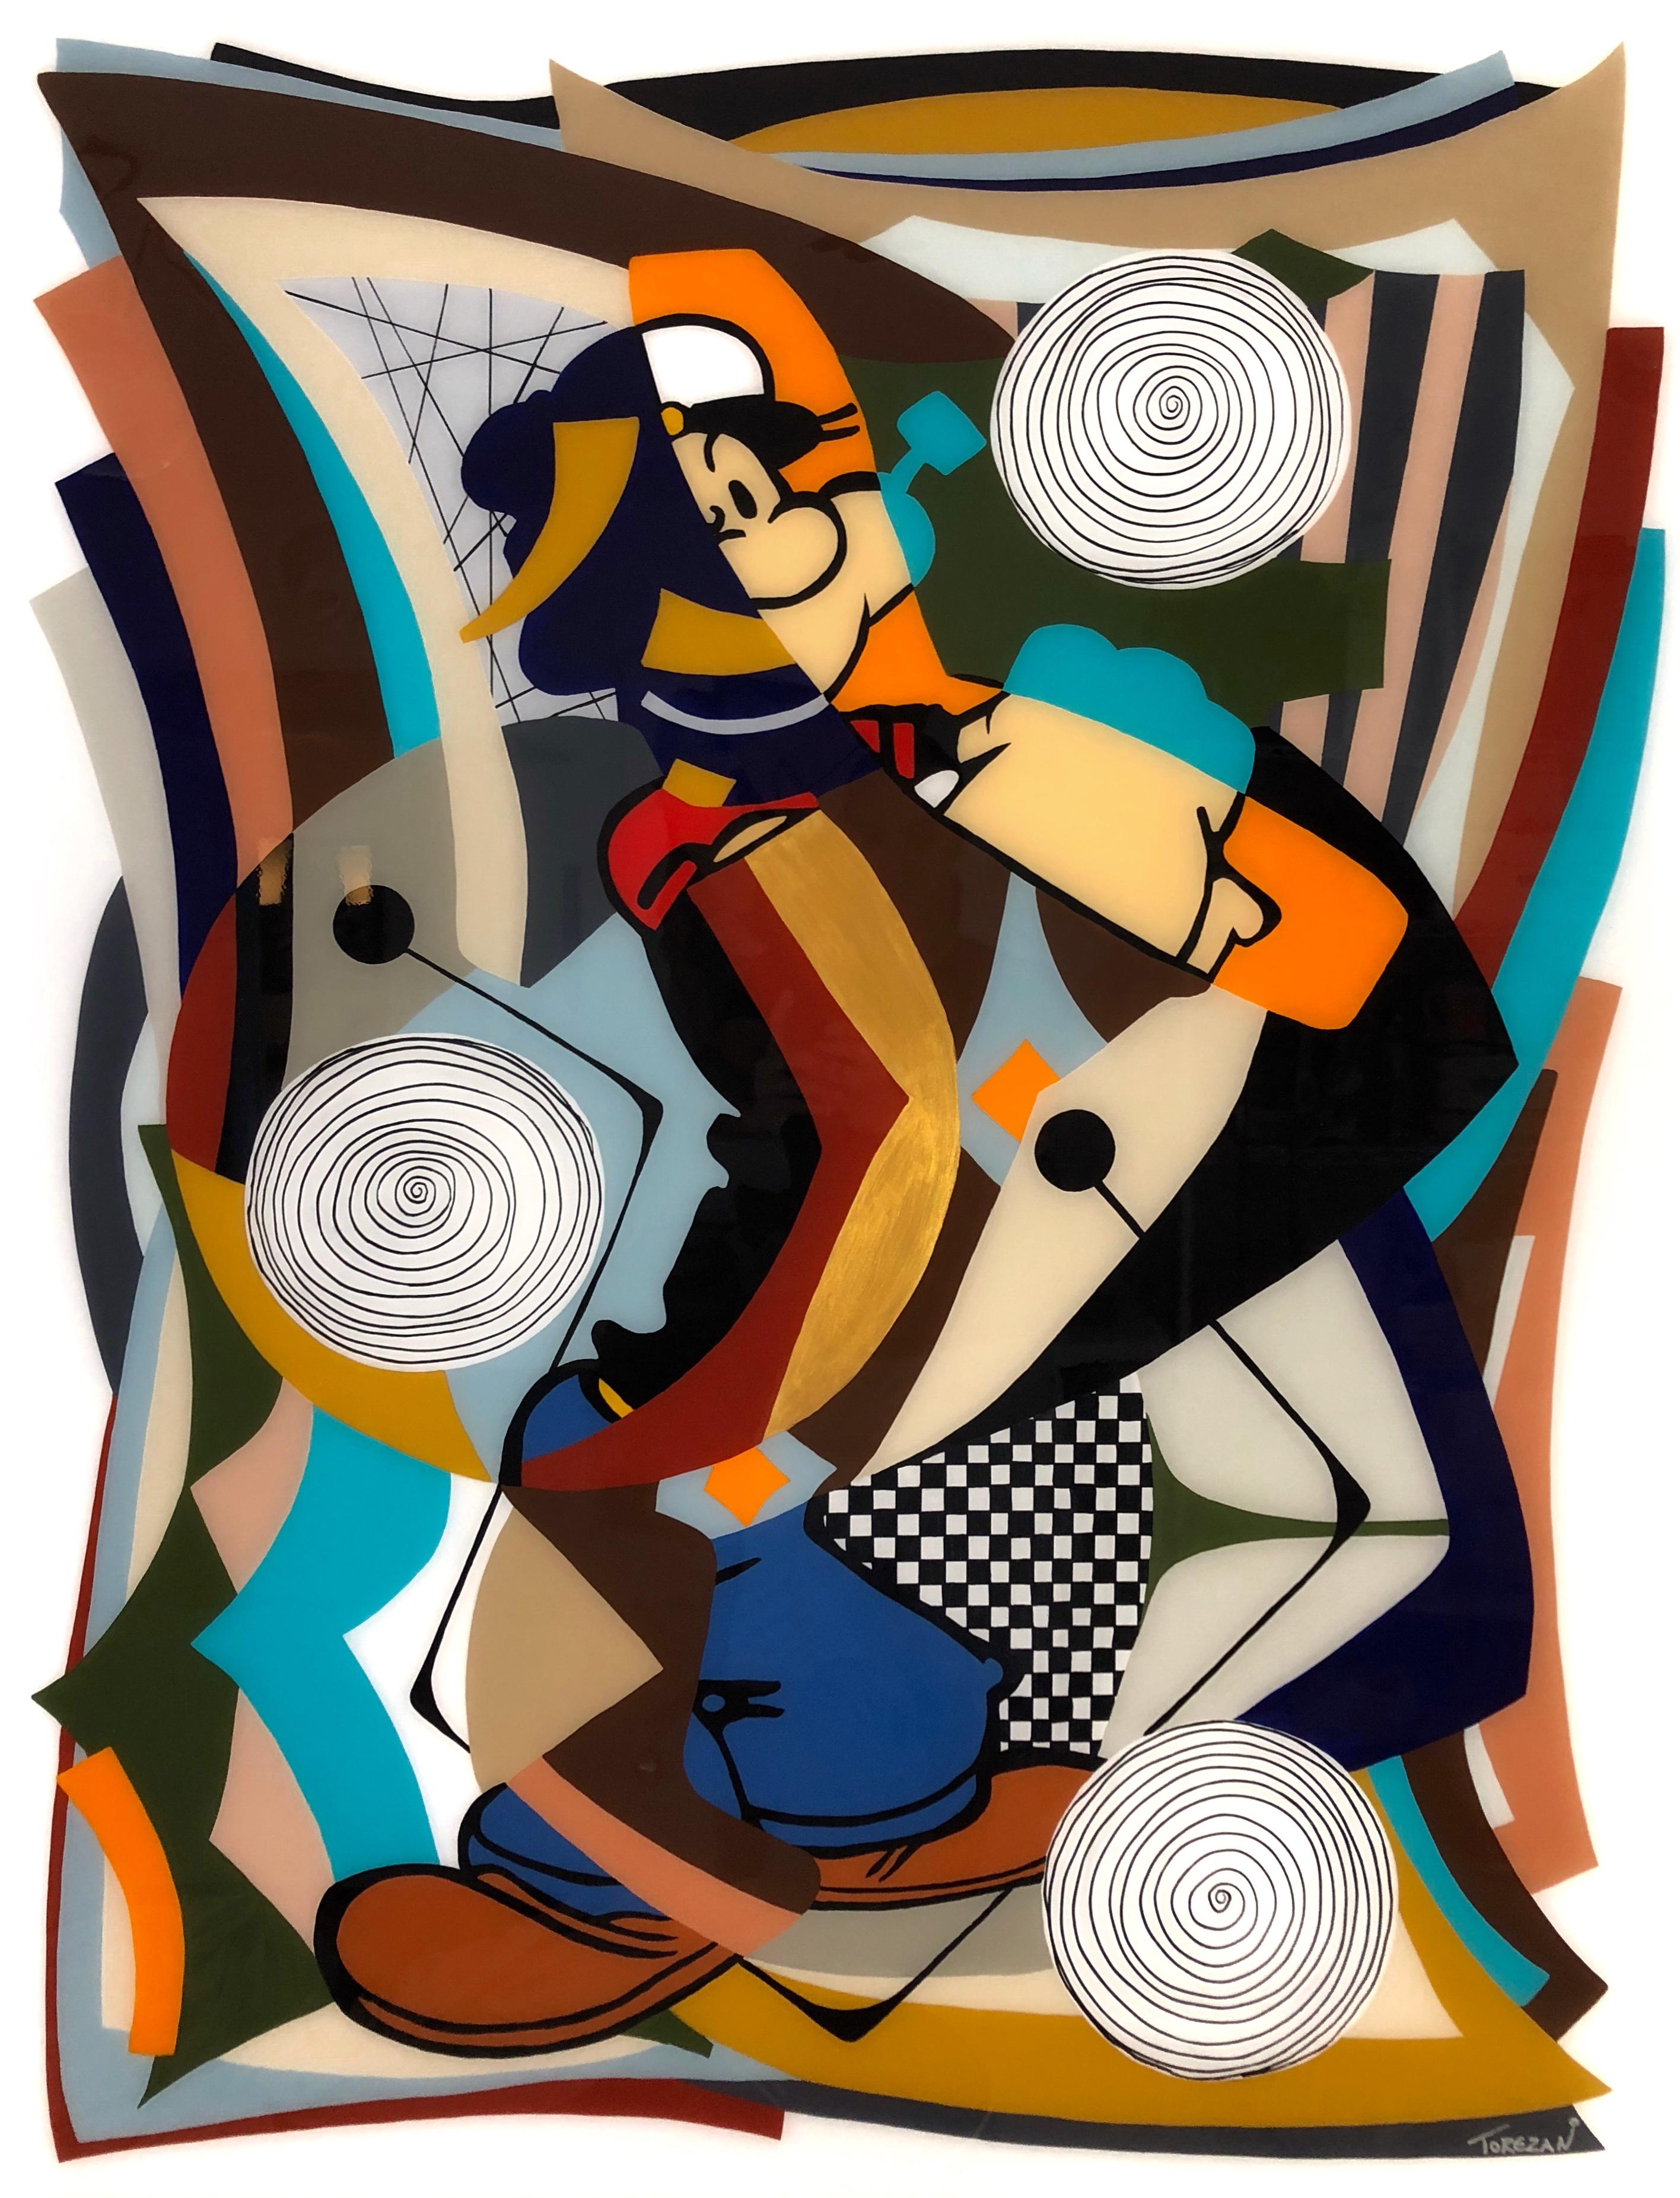 Amauri Torezan
Sailing to Utopia - Popeye
Acrylic and resin on wood panel
48" x 36"
  Torezan is a contemporary artist living in South Florida in the United States. Inspired by modernist abstractions and the modern lifestyle in the Mid-20th century,